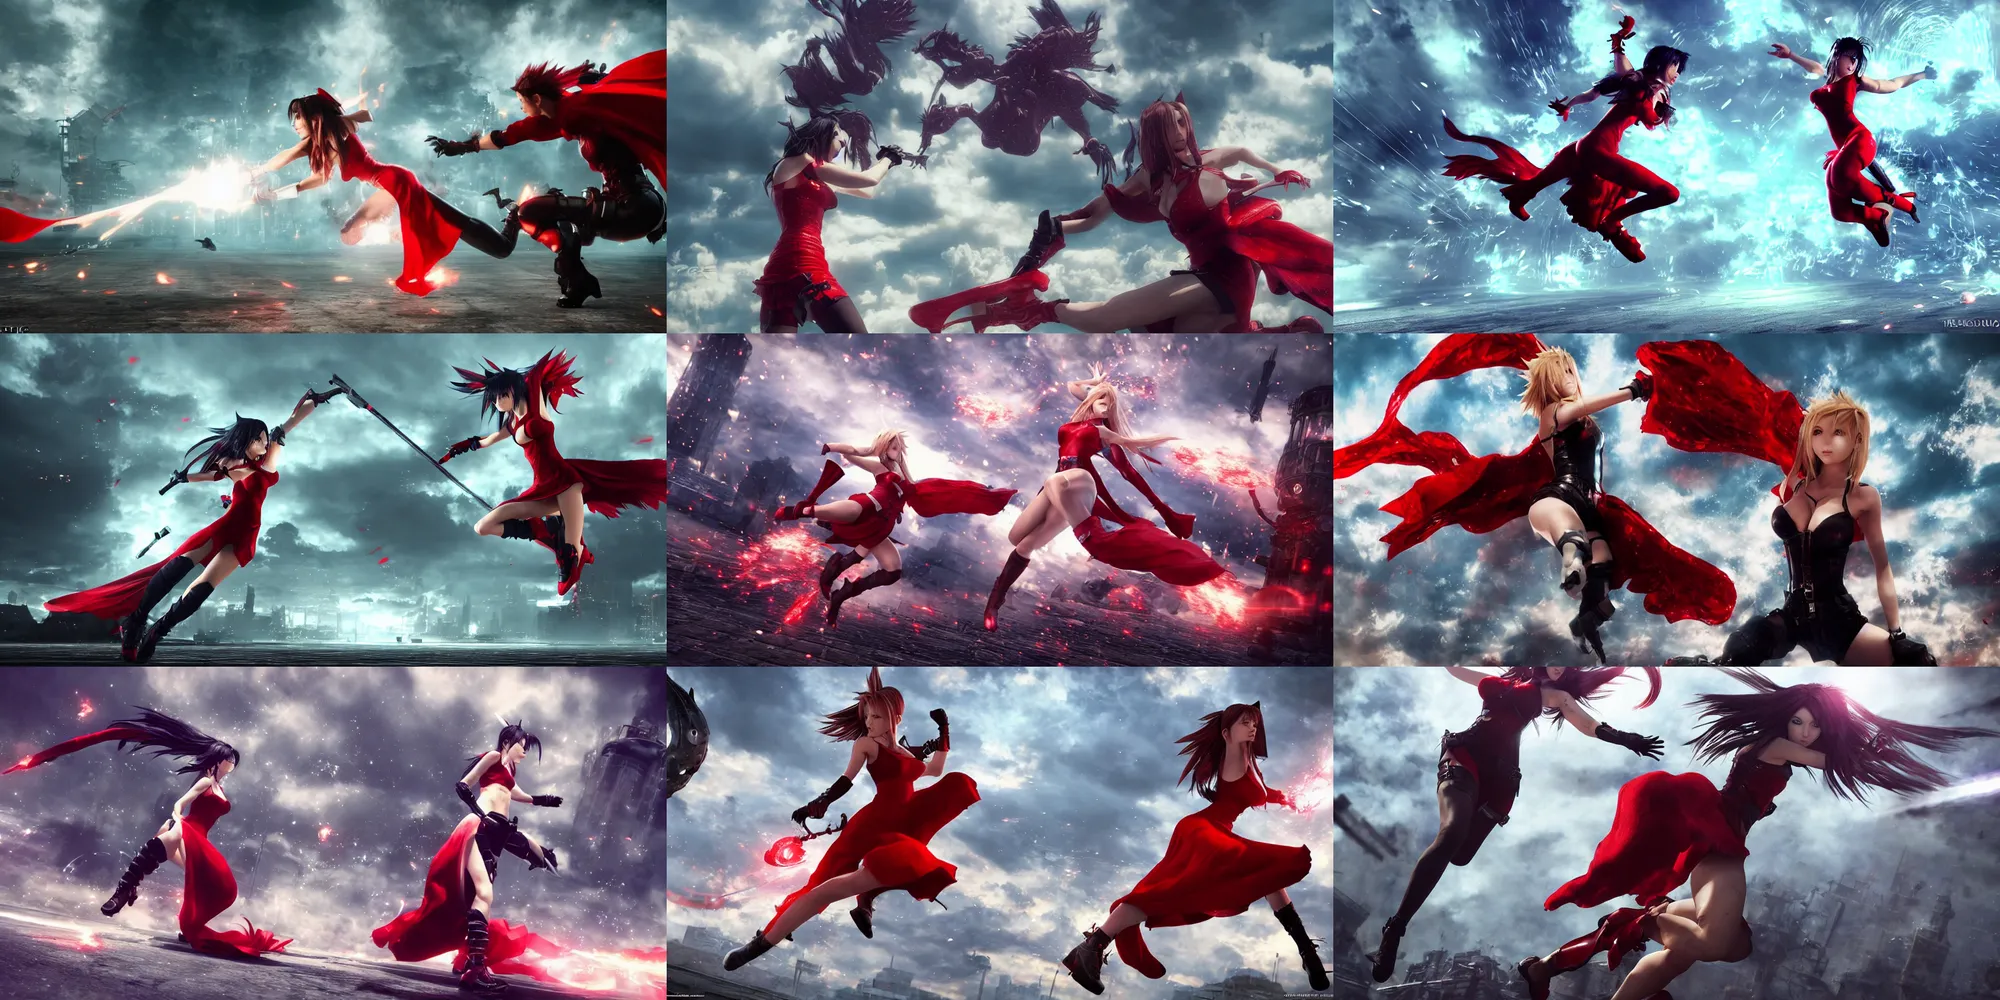 Prompt: epic scene of most gorgeous final fantasy 7 character hyper detail in amazing red dress, fighting catwoman in a tank top, hyper realistic 3 d render, art station, particles, epic scene, mucha, tifa, clouds, jump pose, blur focus, action,